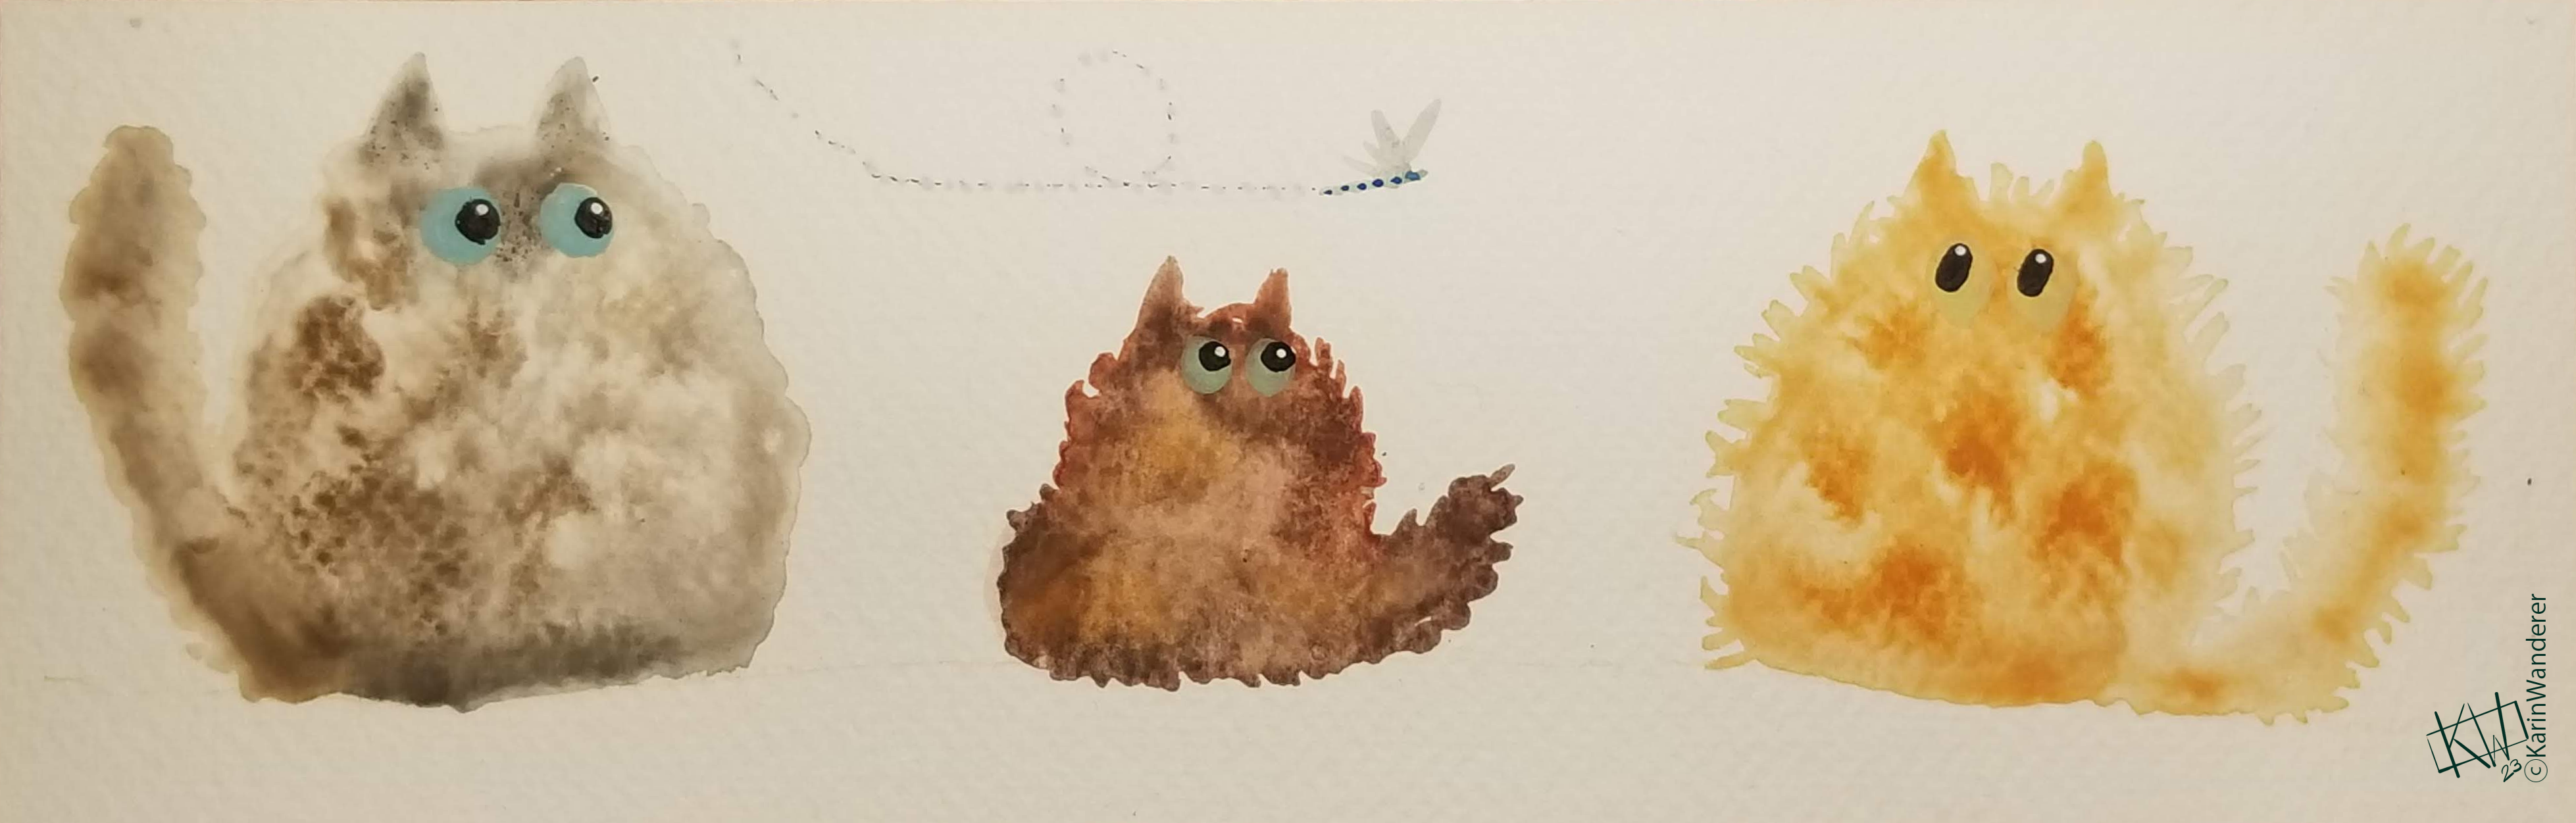 Three watercolor cats - grey, brown, & orange - watch a dragonfly overhead with wide eyes.